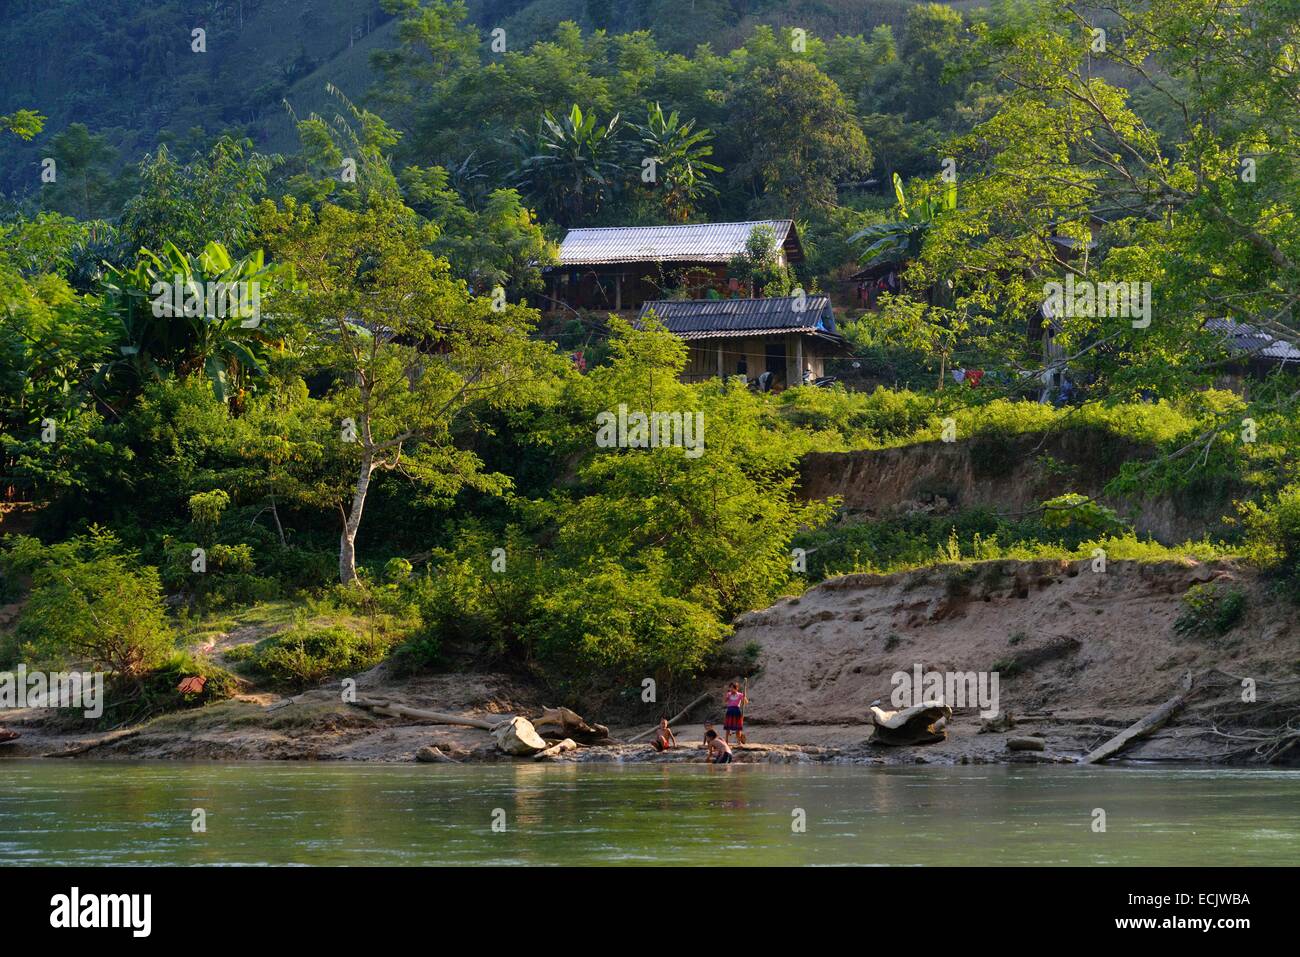 Vietnam, Lao Cai province, Coc Ly, Chay river Stock Photo